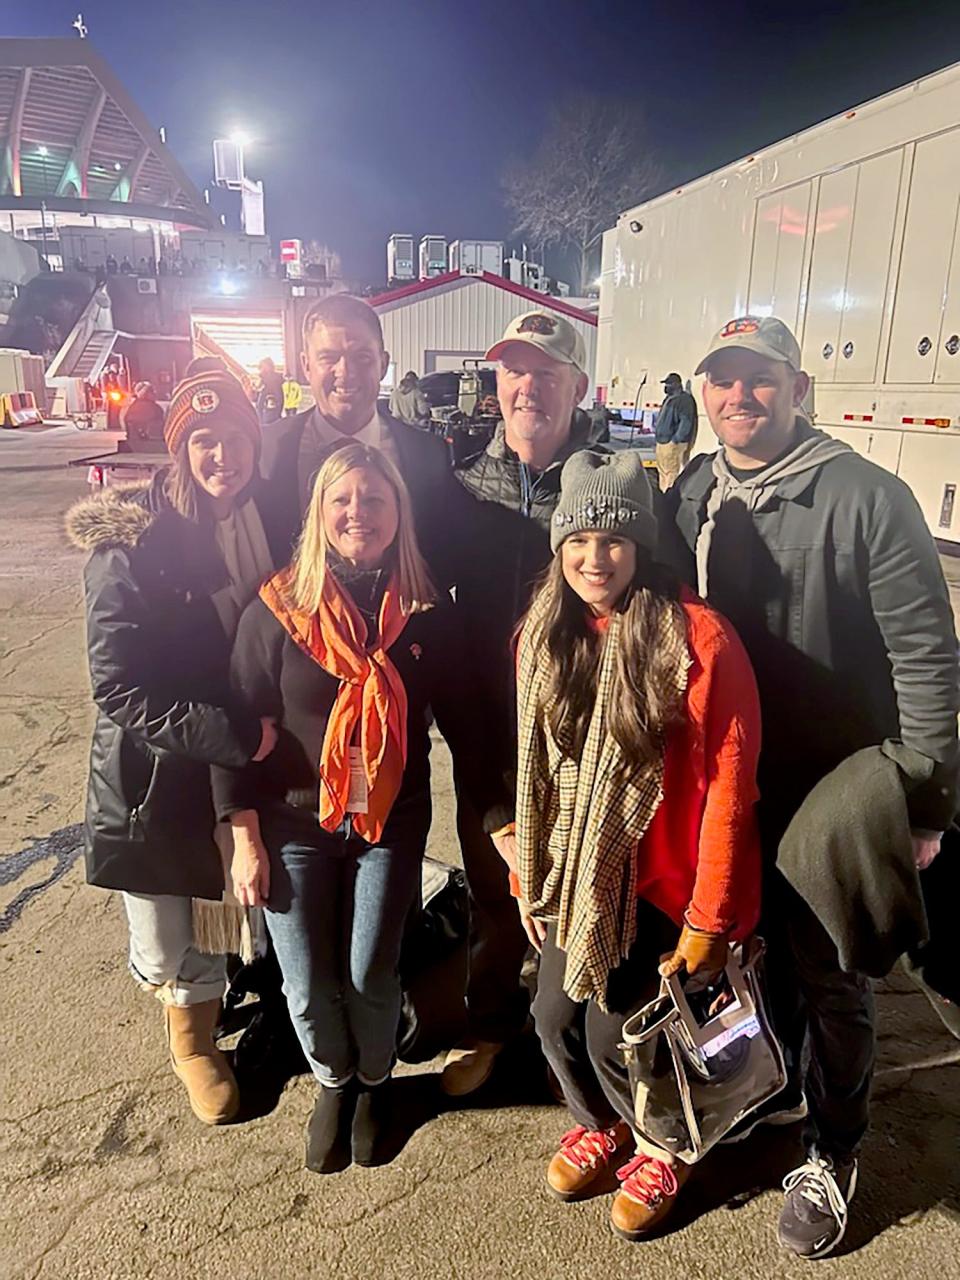 Cincinnati Bengals head coach and Norman native Zac Taylor, second from left, was joined in Kansas City on Jan. 30, 2022, by many family and friends. That included (from left to right) sister Quincy; mom, Julie; dad, Sherwood; sister-in-law, Brooklyn; and brother, Press.